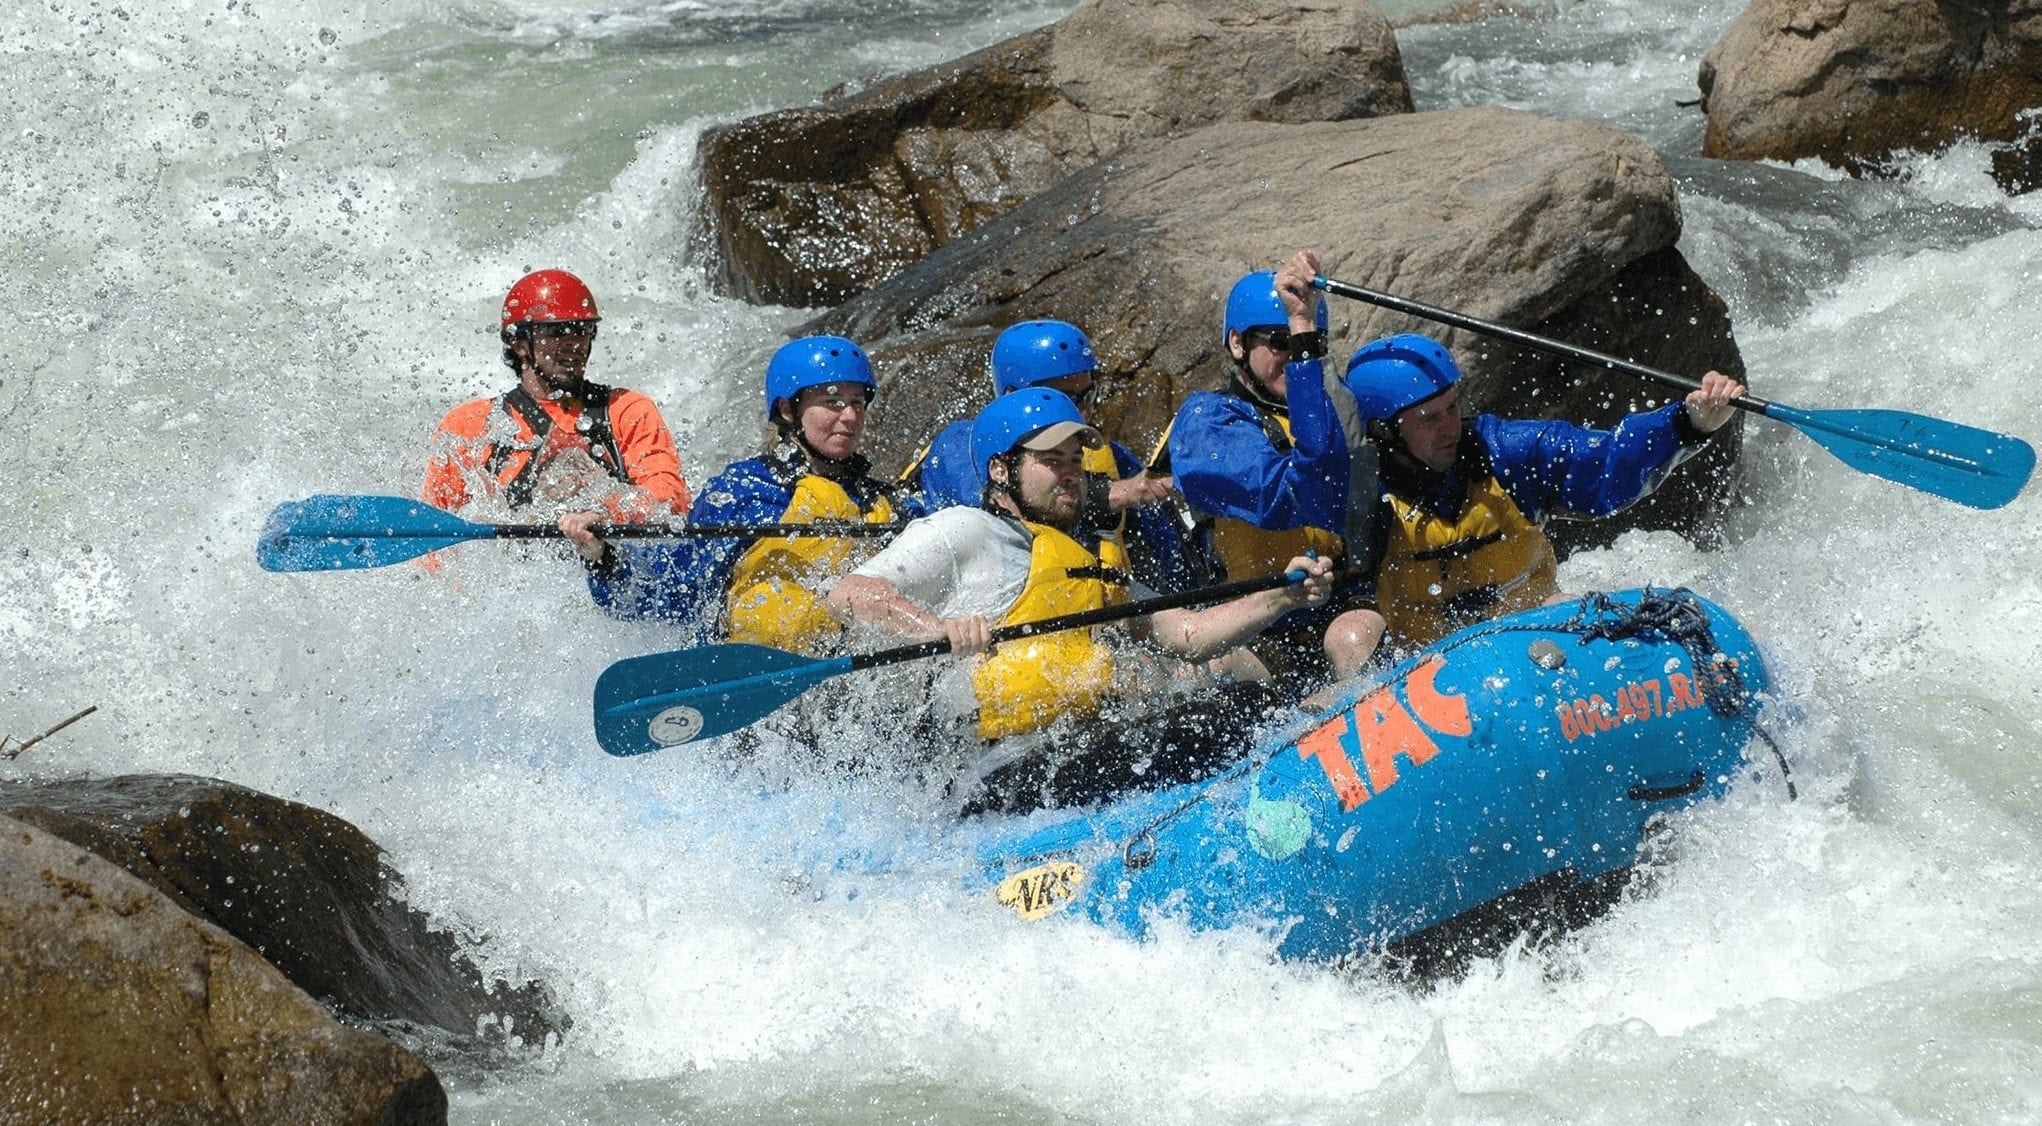 A rafting boat encounters rapids in the Blue River